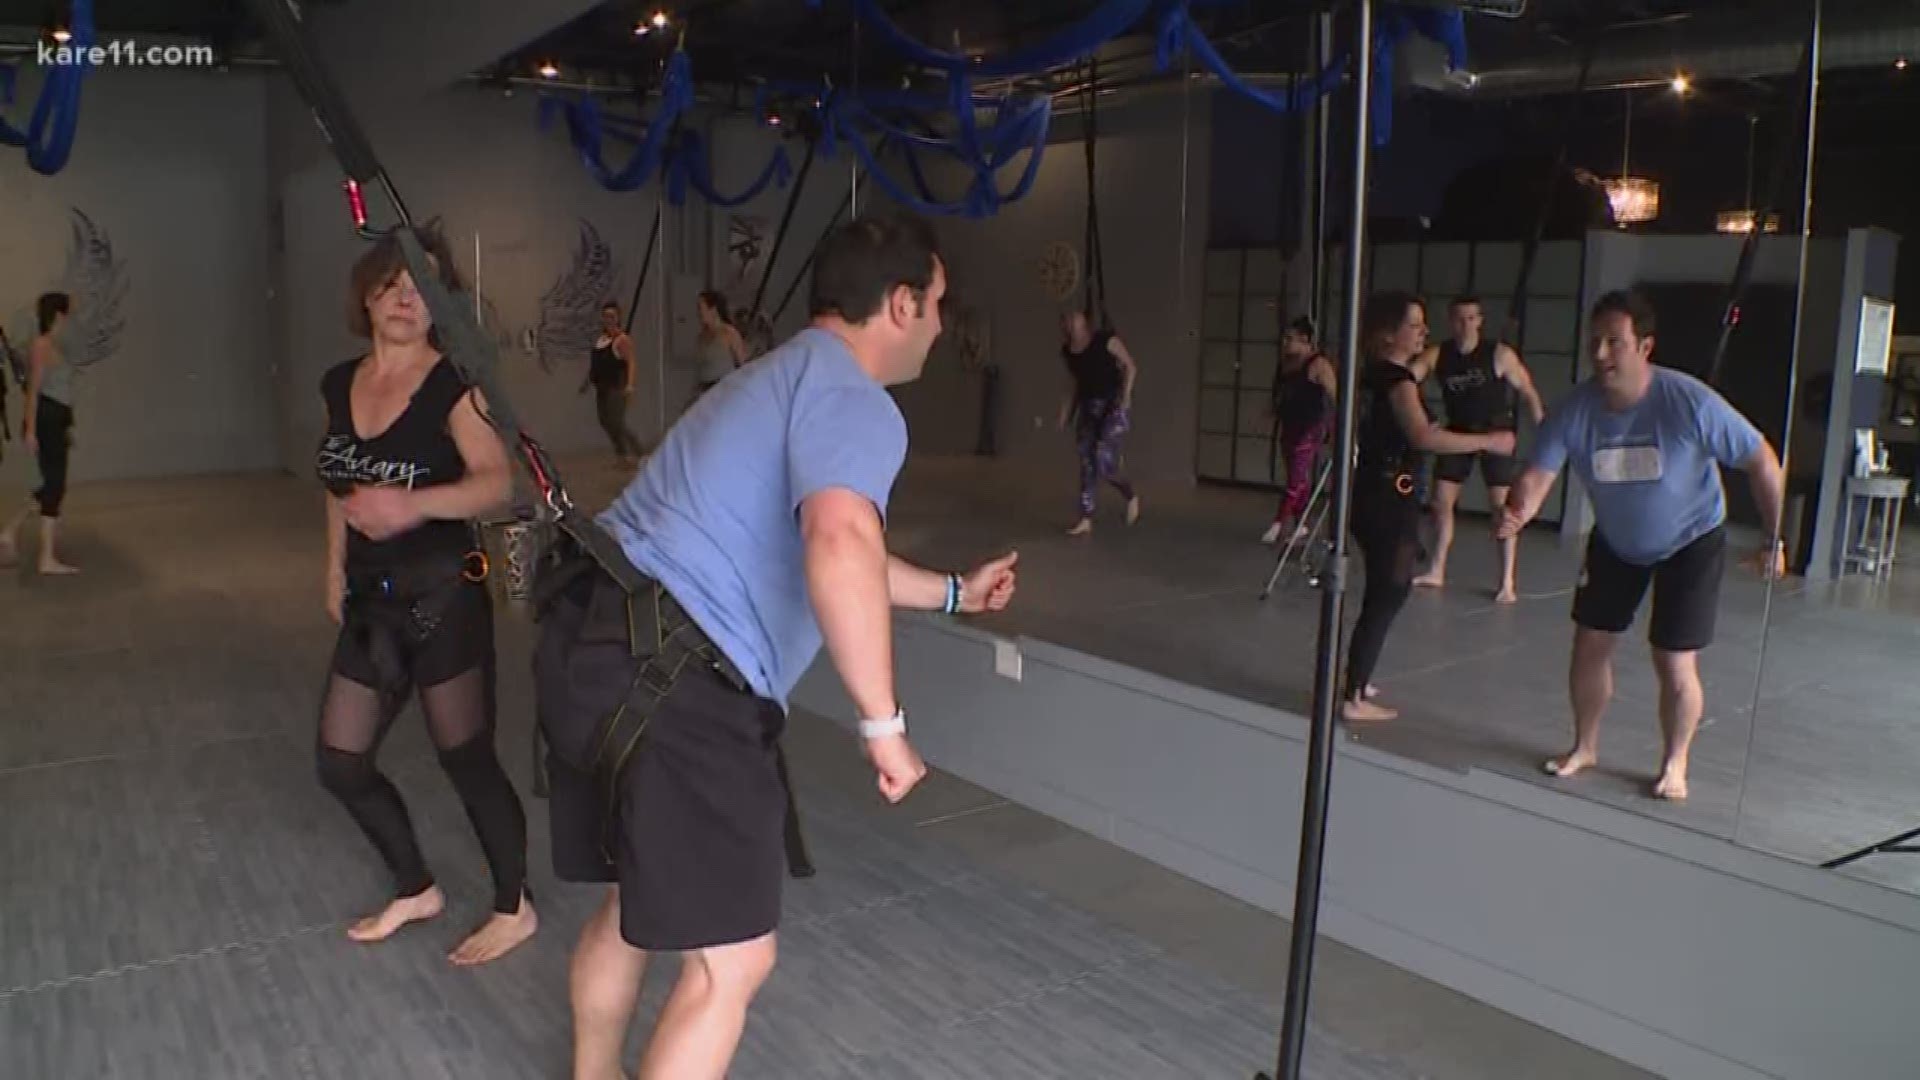 The Aviary in Minnetonka offers a new way to workout by using bungee cords, and Dave Schwartz went in to check it out.